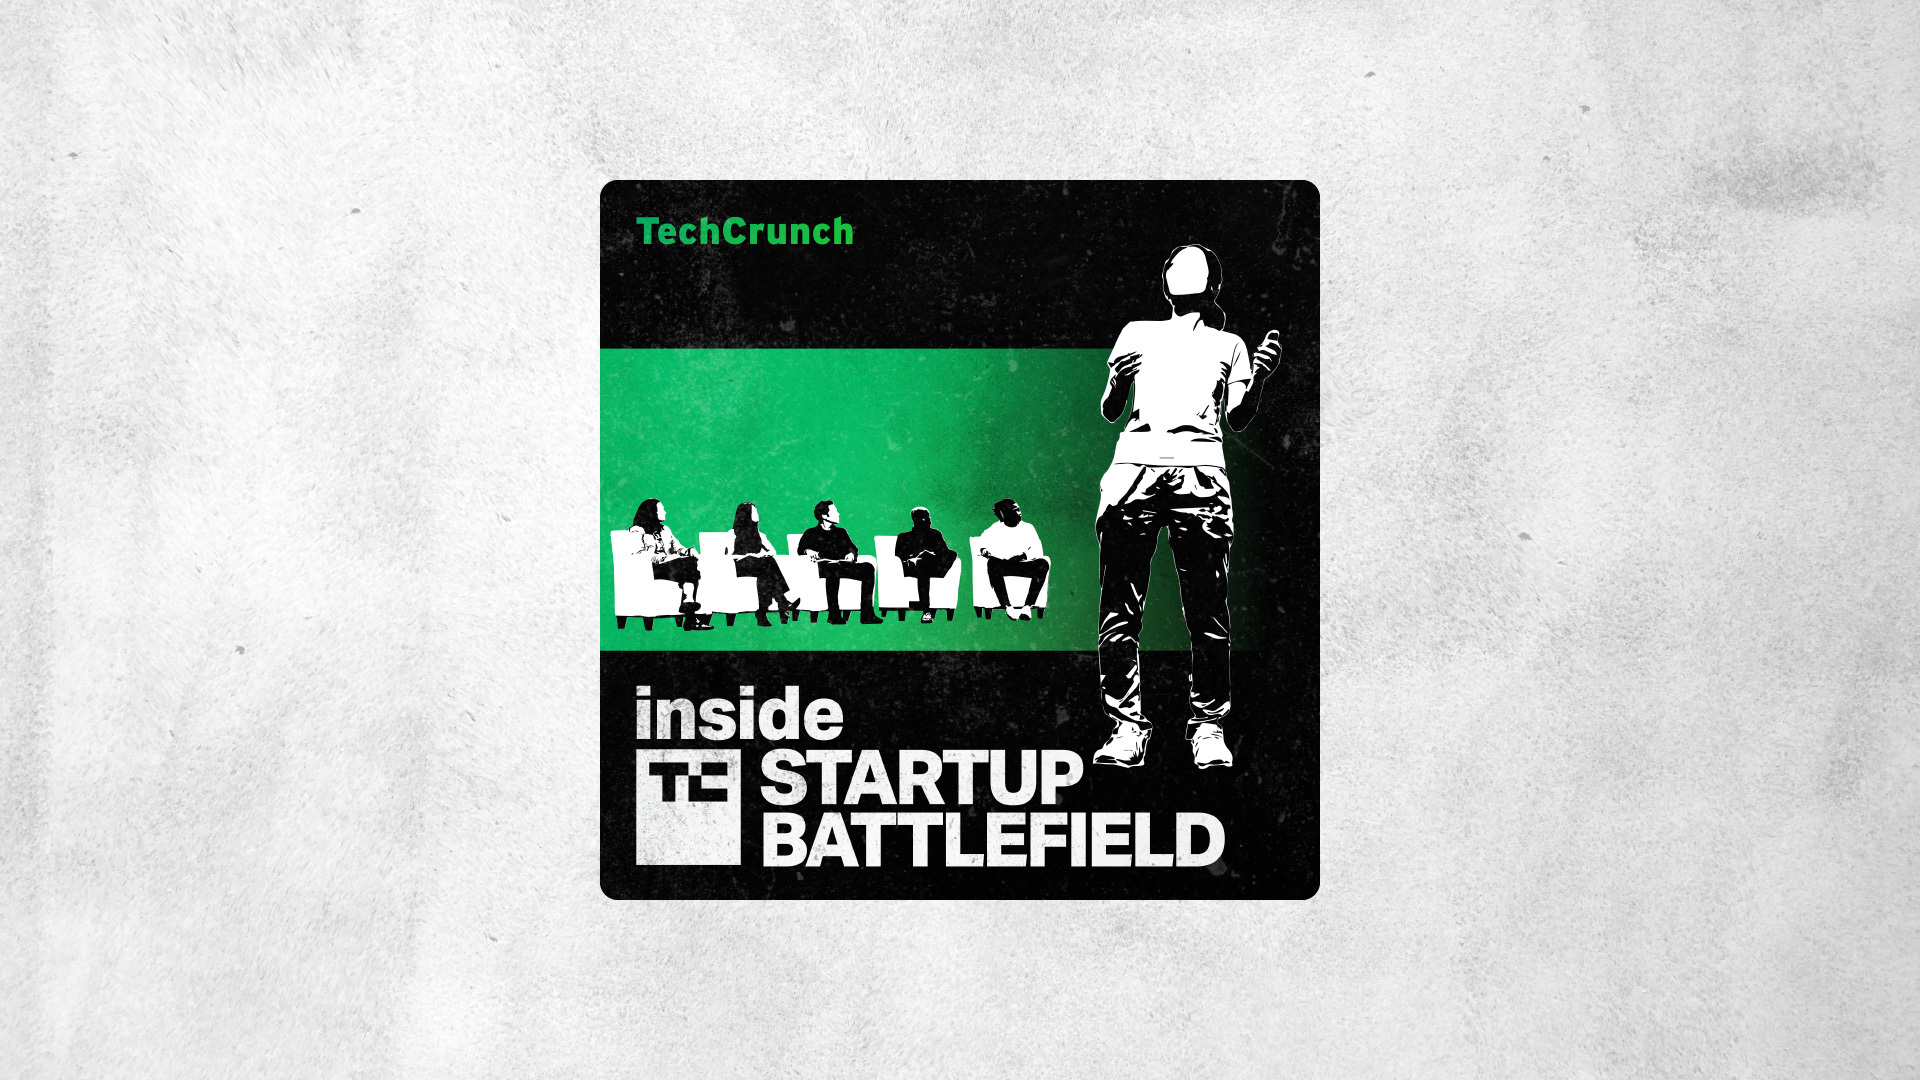 Within the Battlefield Podcast home screen